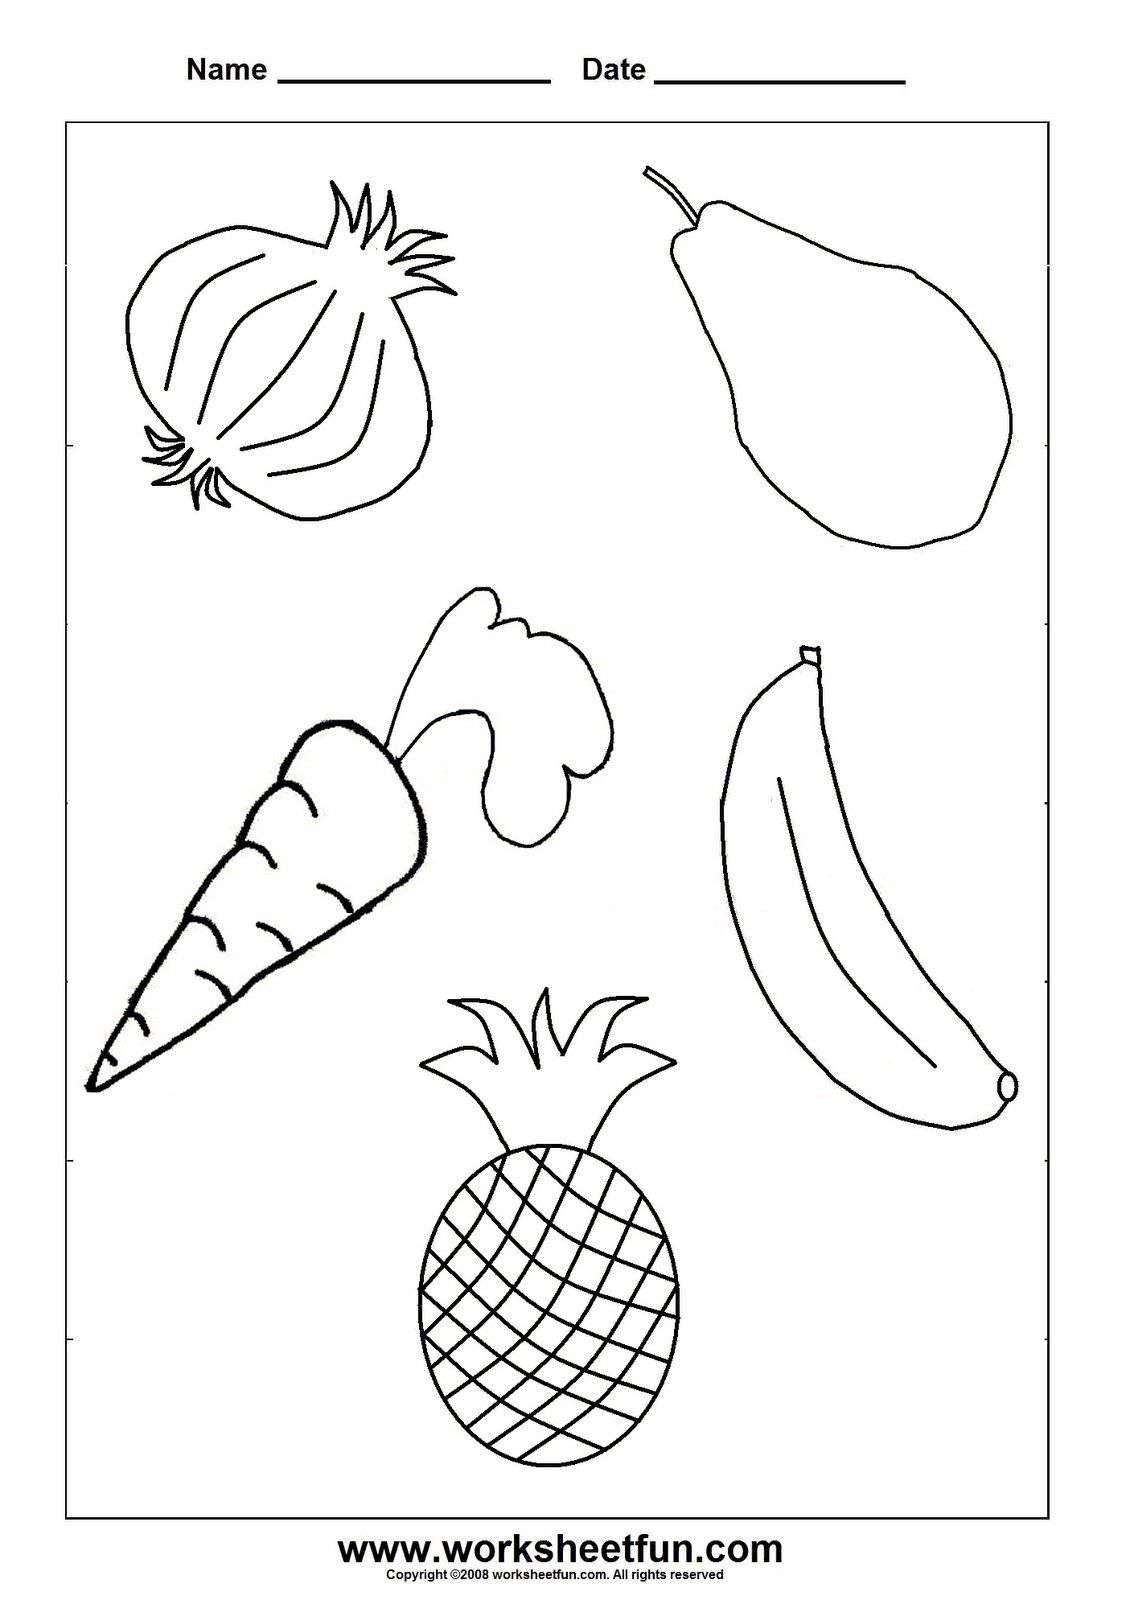 Preschool Fruits And Vegetables Worksheets – With Arts Crafts Also | Free Printable Arts And Crafts Worksheets